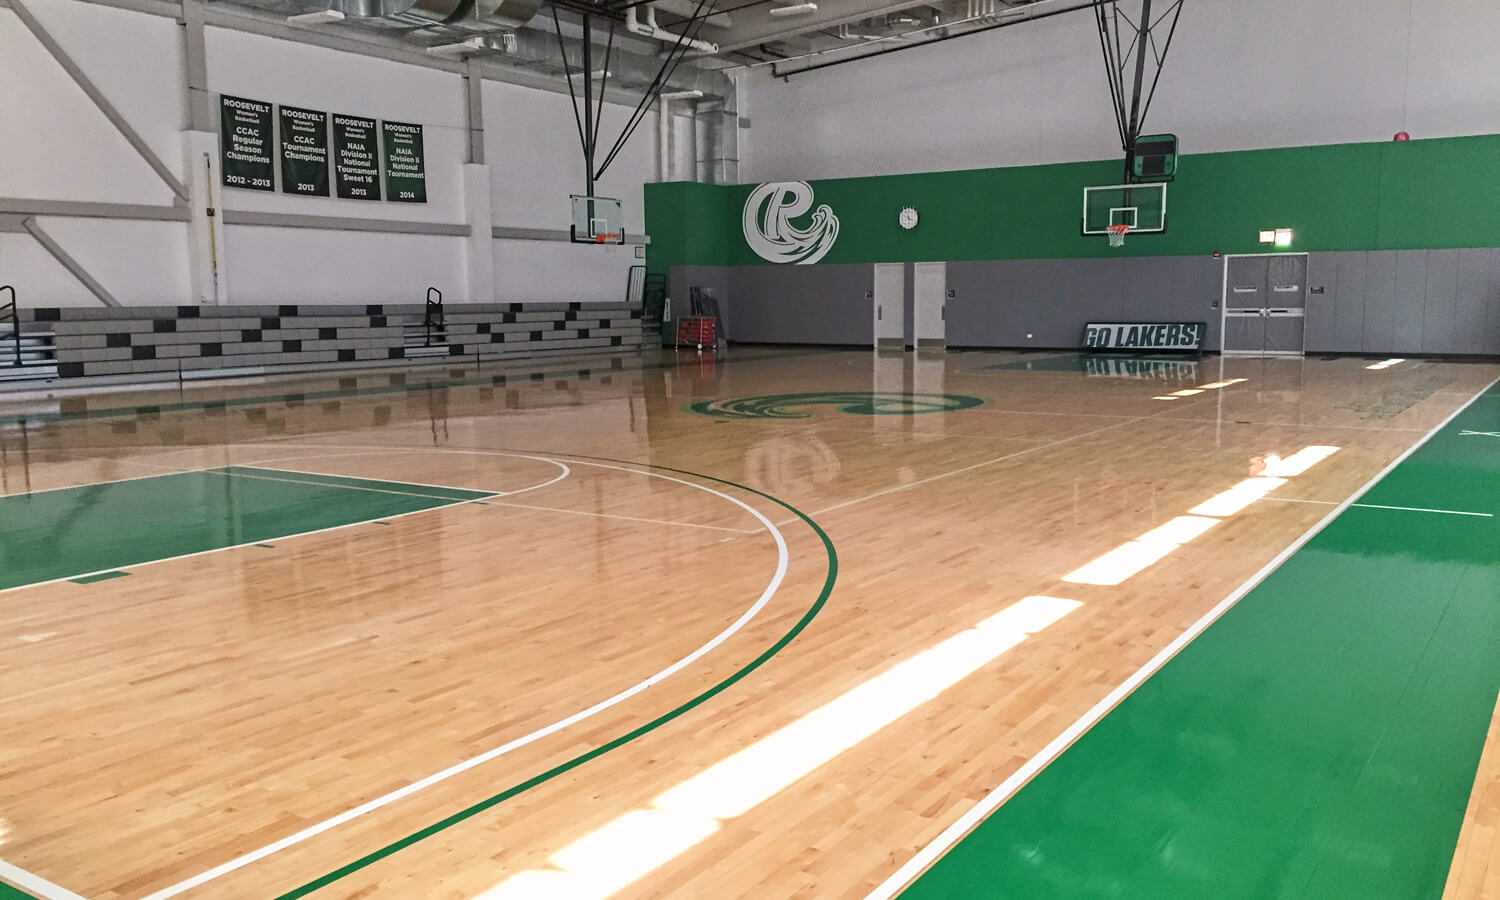 A view of the Goodman Center basketball court with green Roosevelt colors featured on the walls and floor.